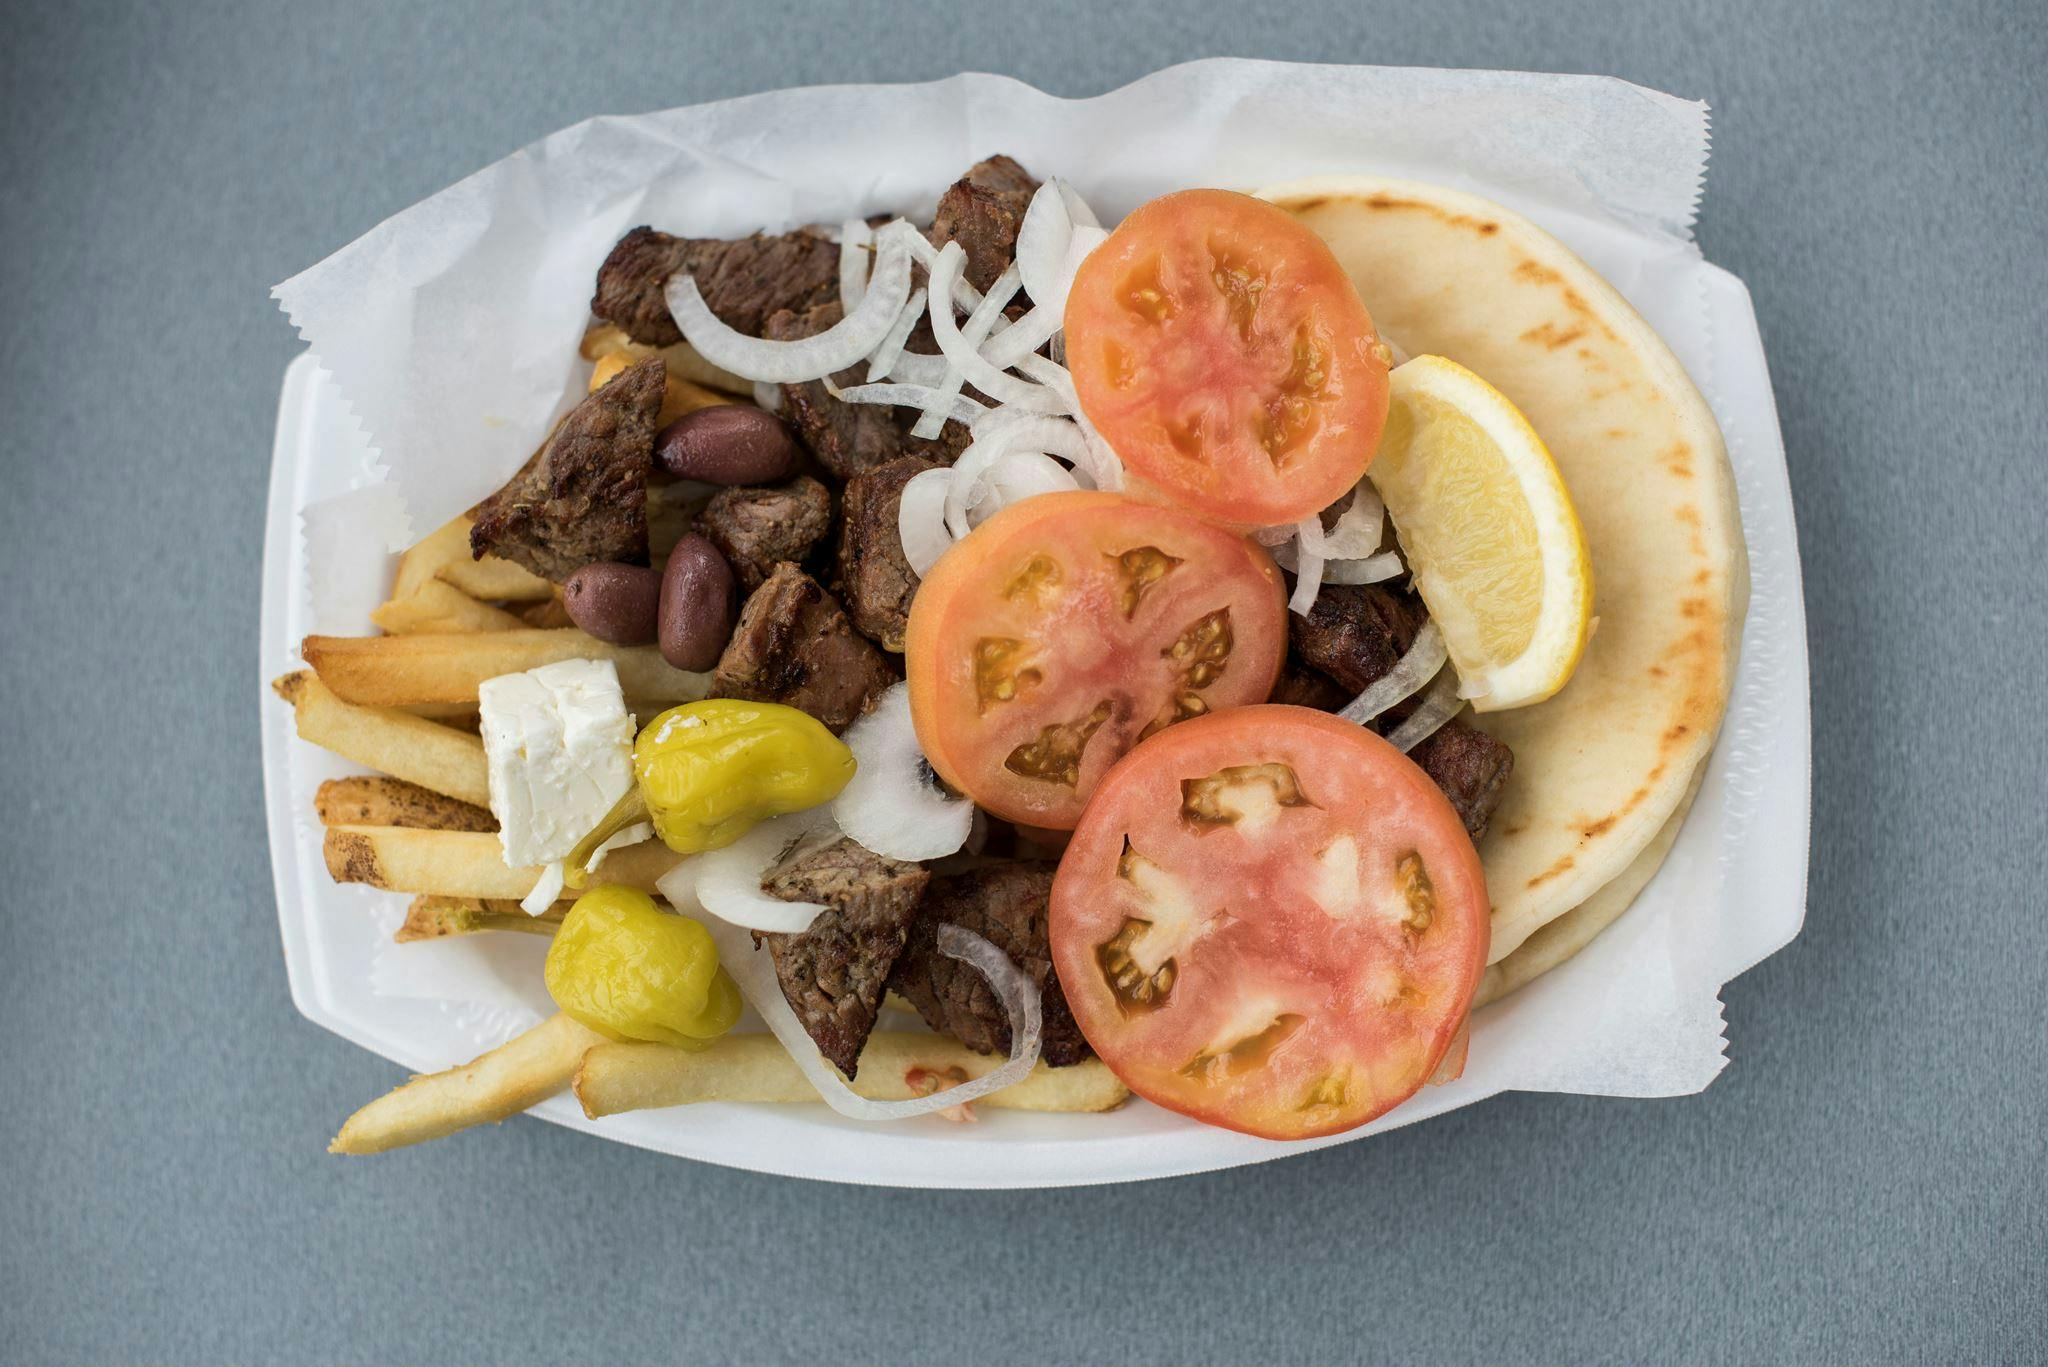 Beef Shish Kabob Plate from Gyro Palace - Glendale in Glendale, WI